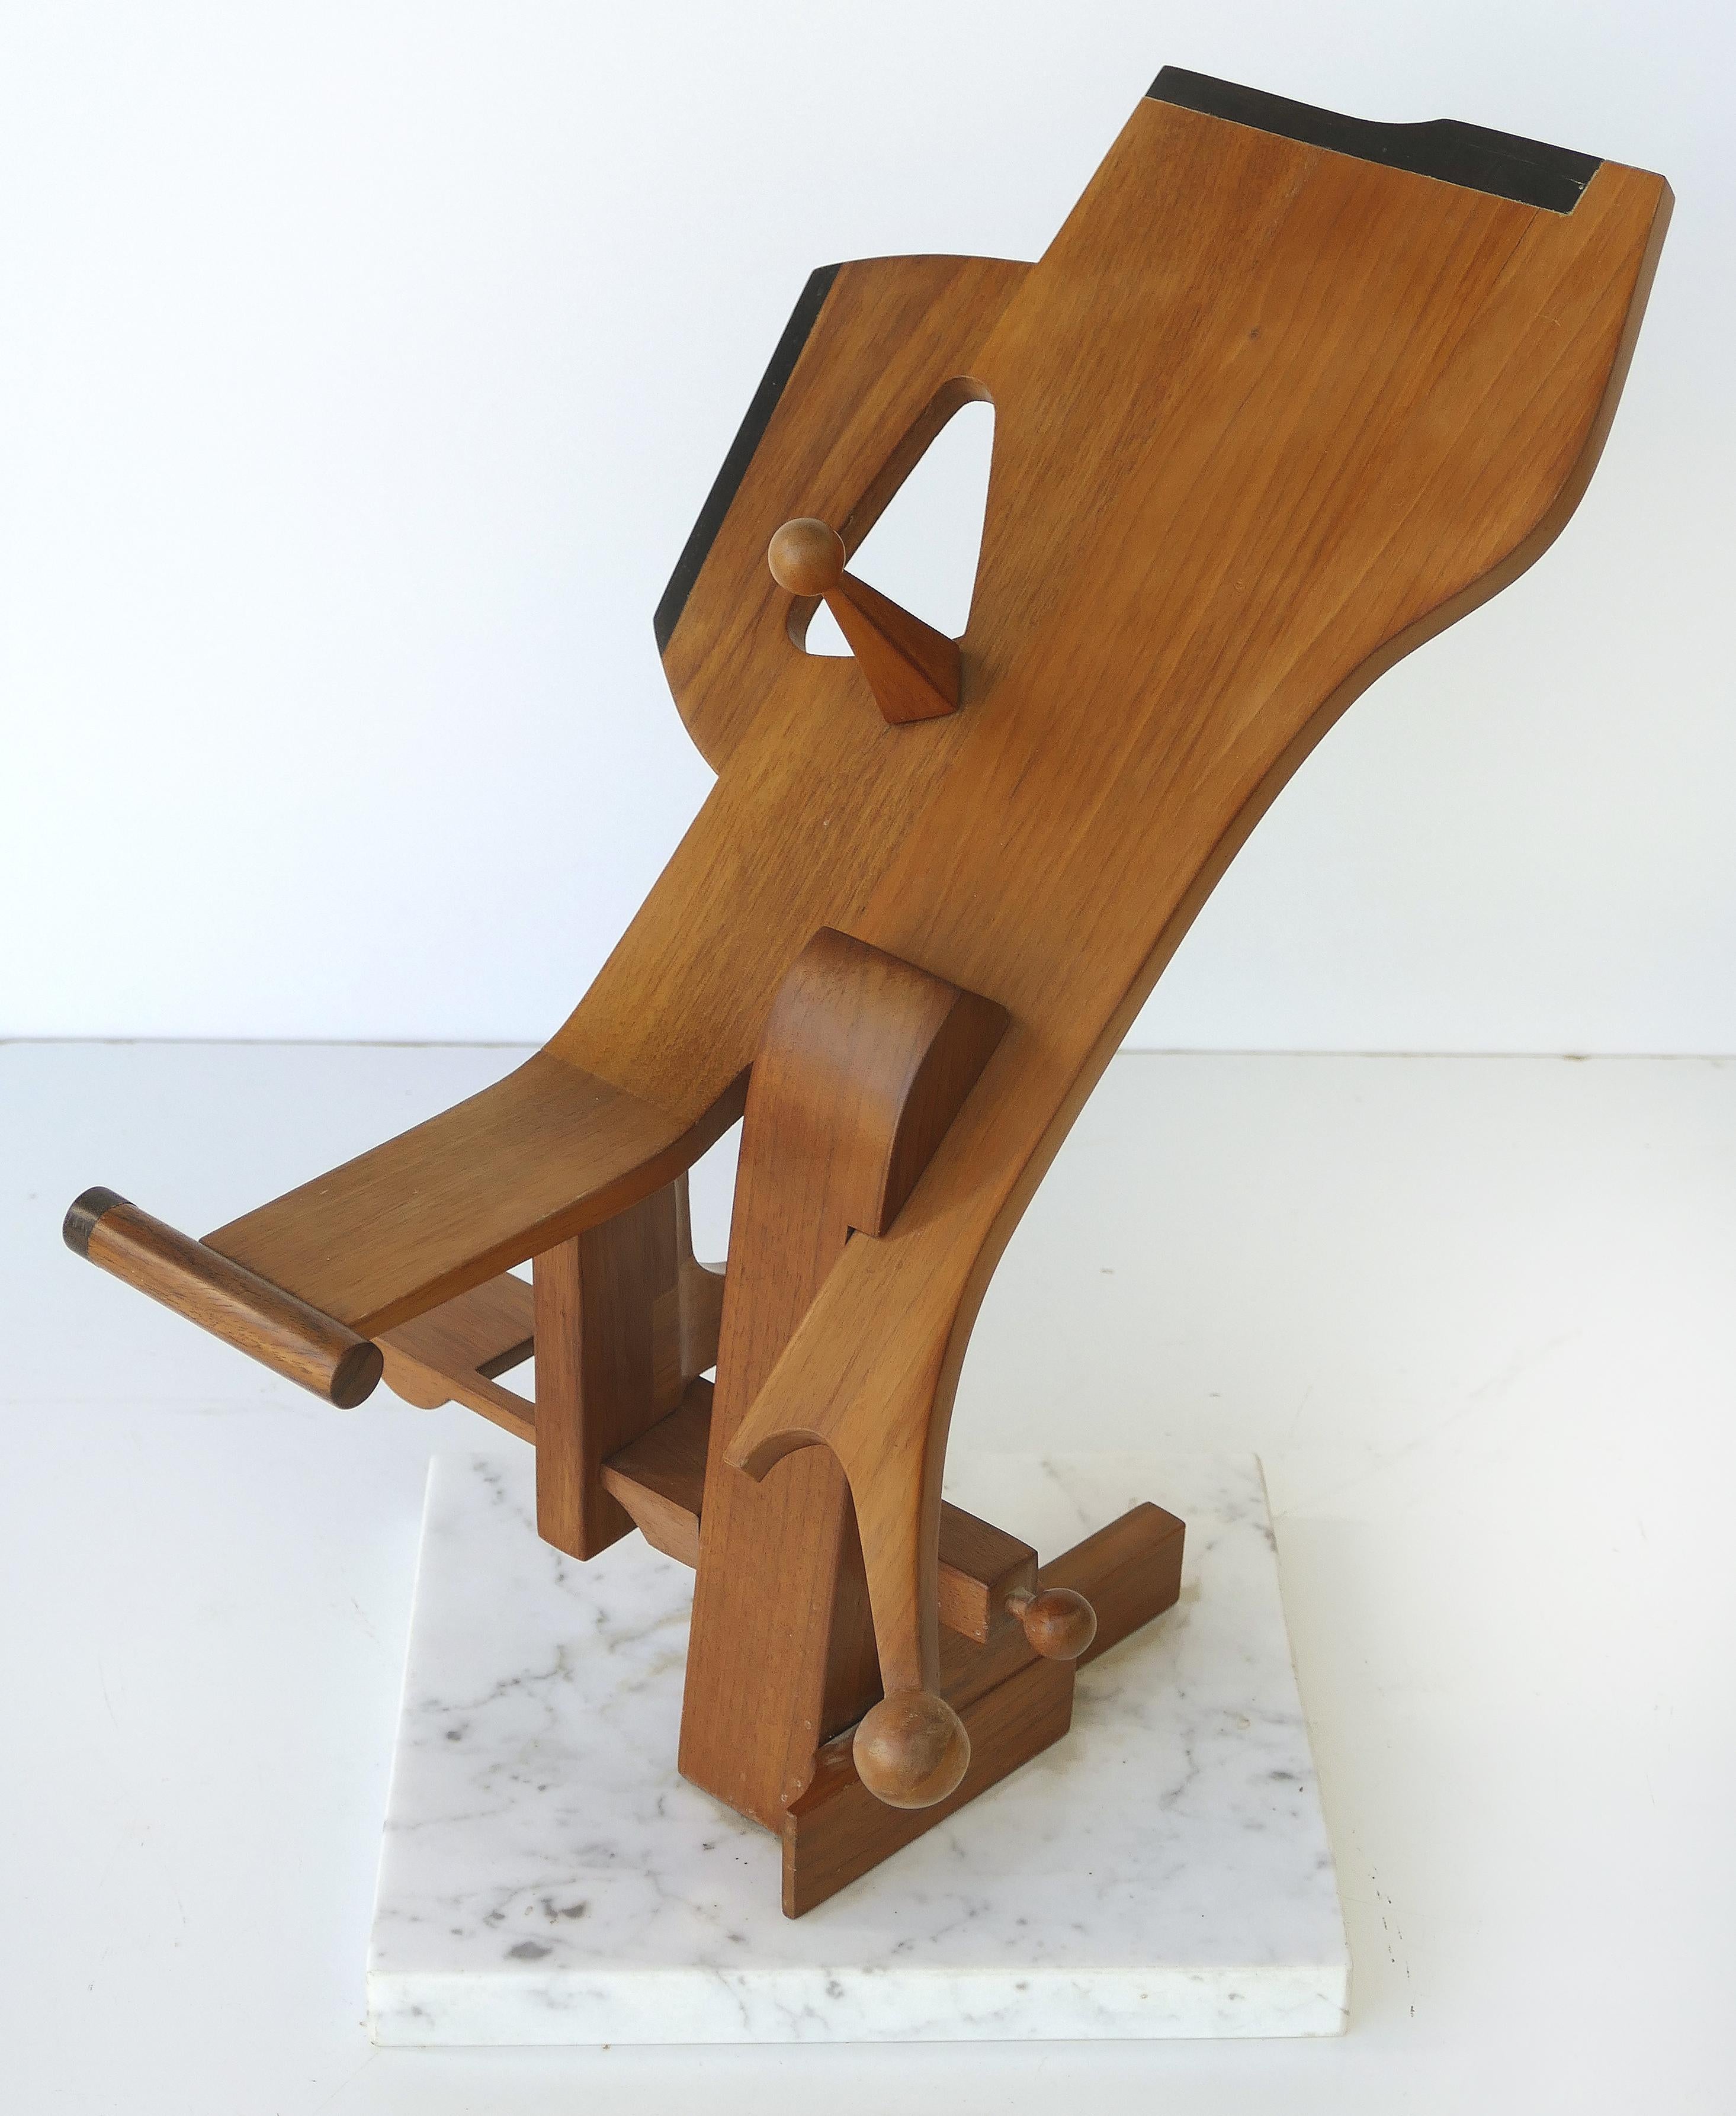 Abstract wood Brutalist sculpture, manner of Leo Amino

Offered for sale is an abstract Brutalist wood sculpture with architectural inspiration created in the manner of Leo Amino. The sculpture is viewed in the round and mounted on a marble base.